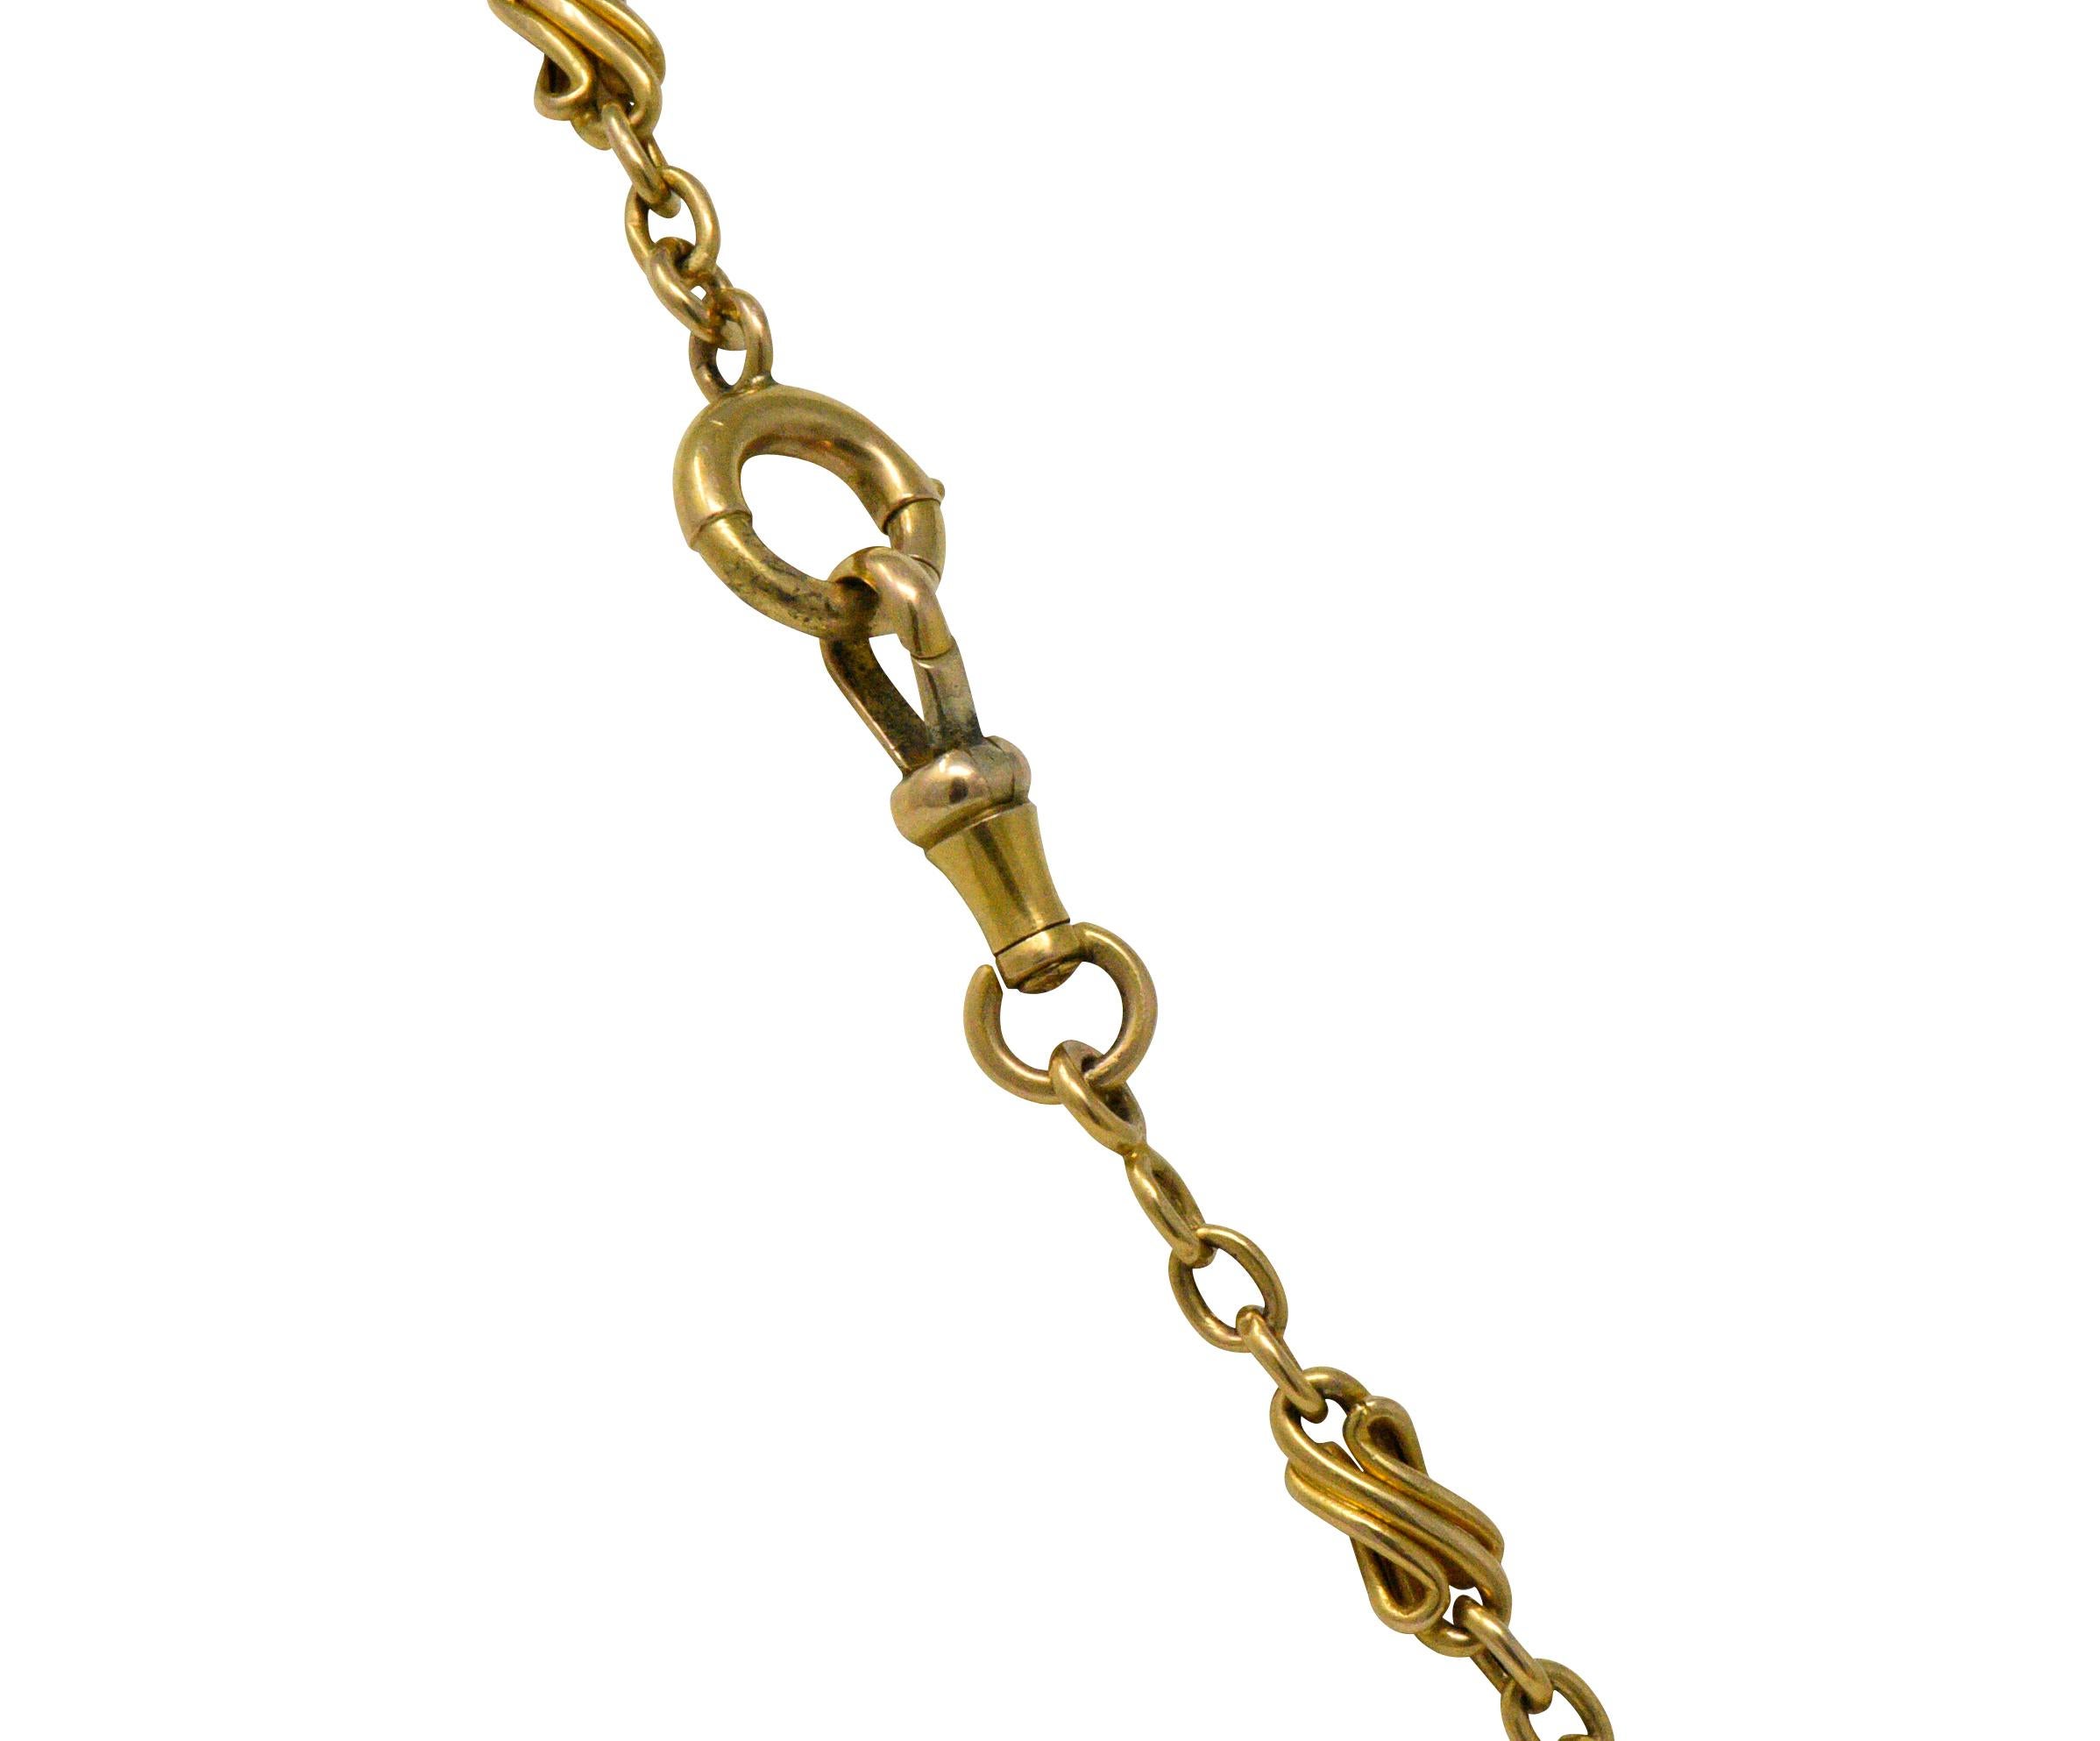 Long-chain necklace comprised of decorative swiveled links alternating with jump ring spacer links

Completed by hinged clasp

With French assay marks for 18 karat gold

Length: 62 1/2 inches

Width at widest: 5.2 mm 

Total weight: 36.1